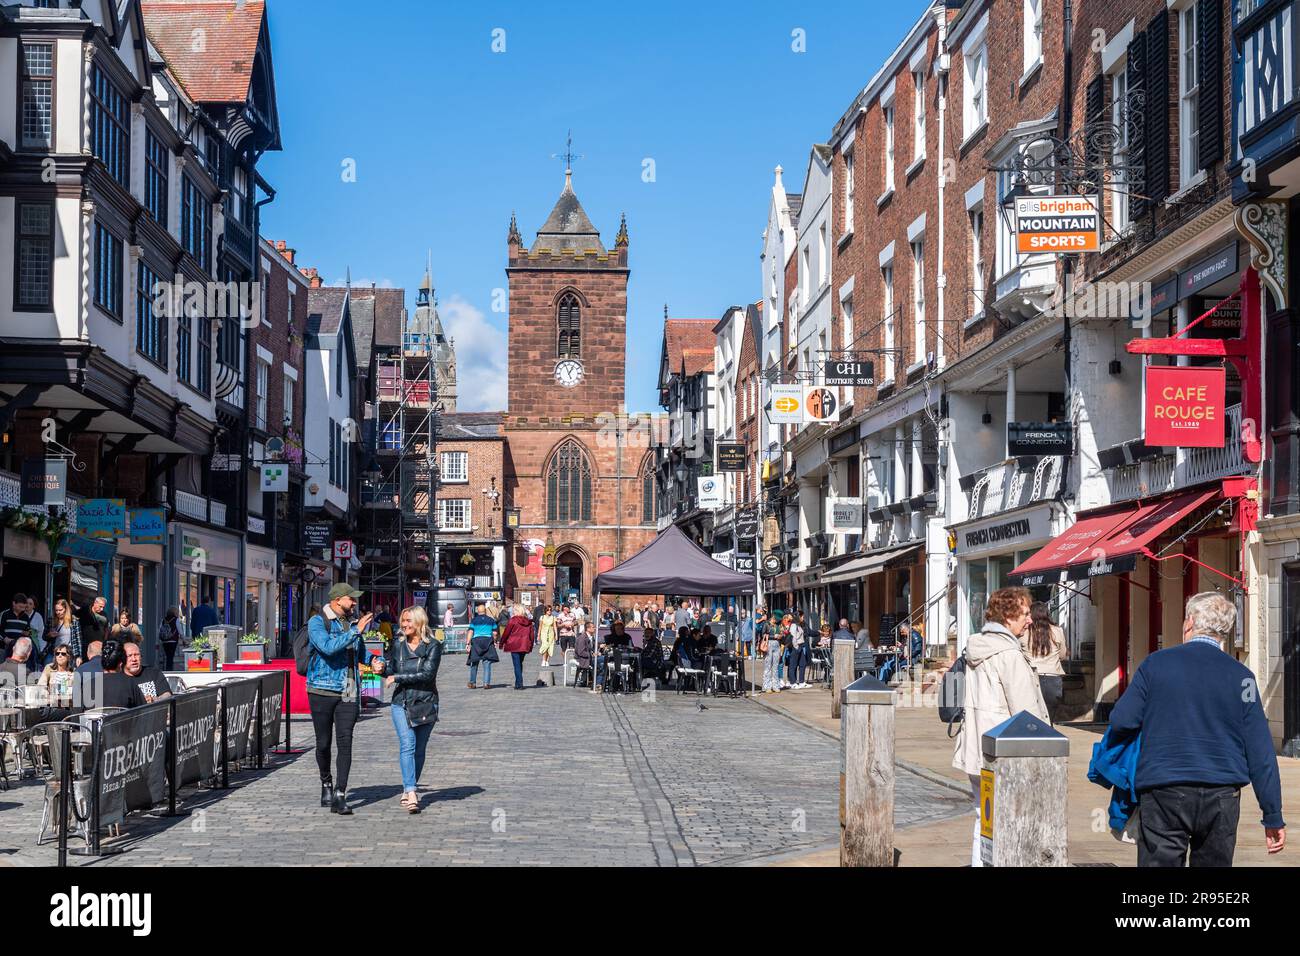 Tower of St. Peter's Church At The Cross, Chester City Centre, Cheshire, UK. Stock Photo